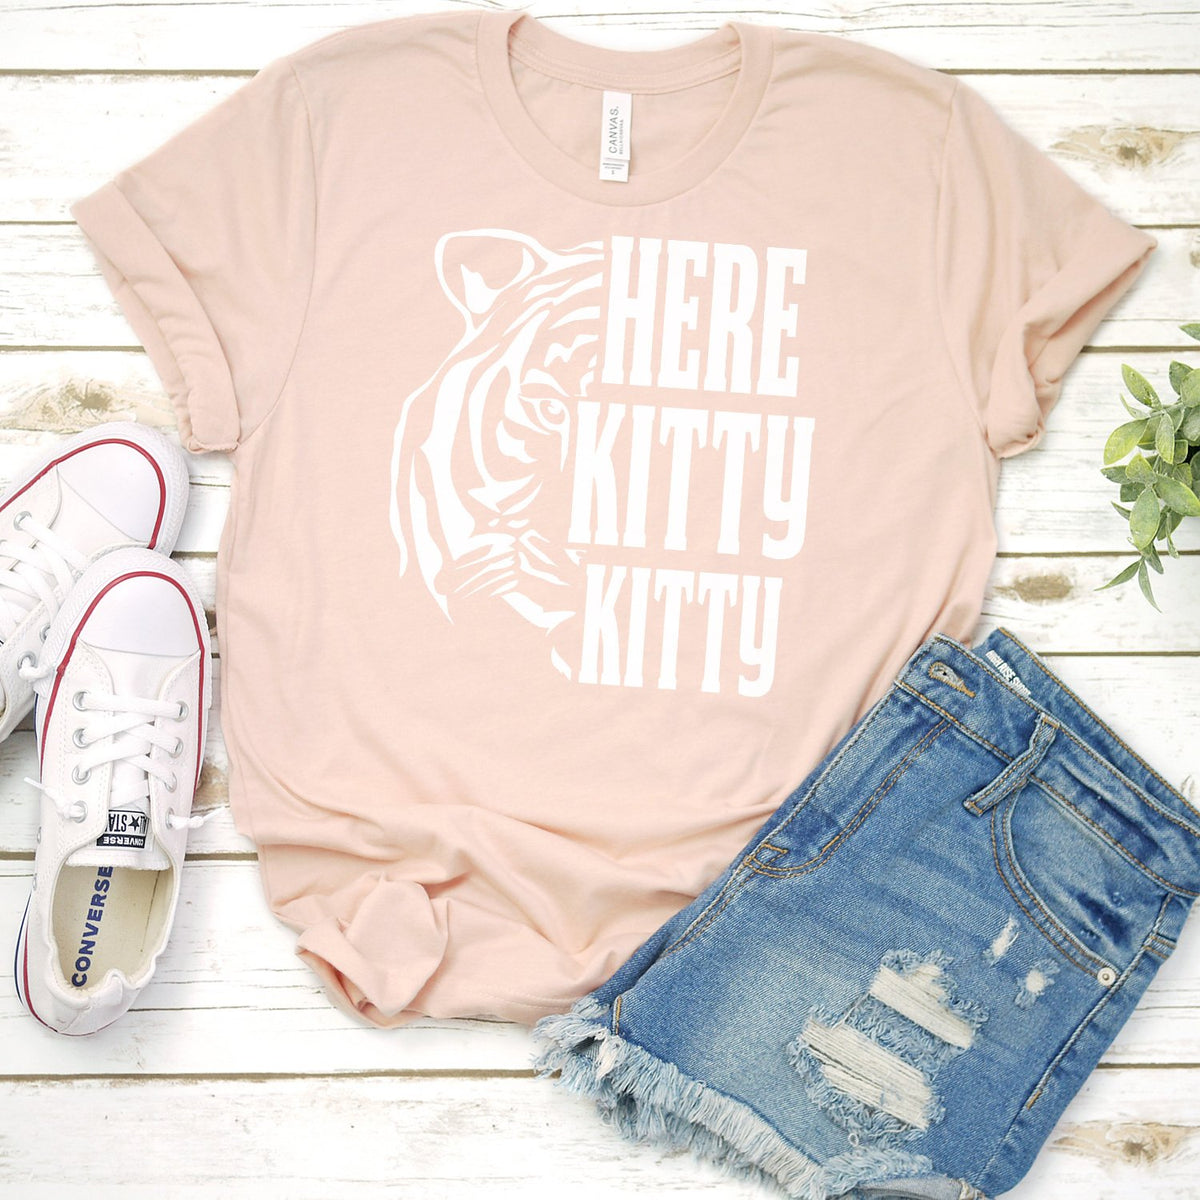 Here Kitty Kitty with Tiger - Short Sleeve Tee Shirt